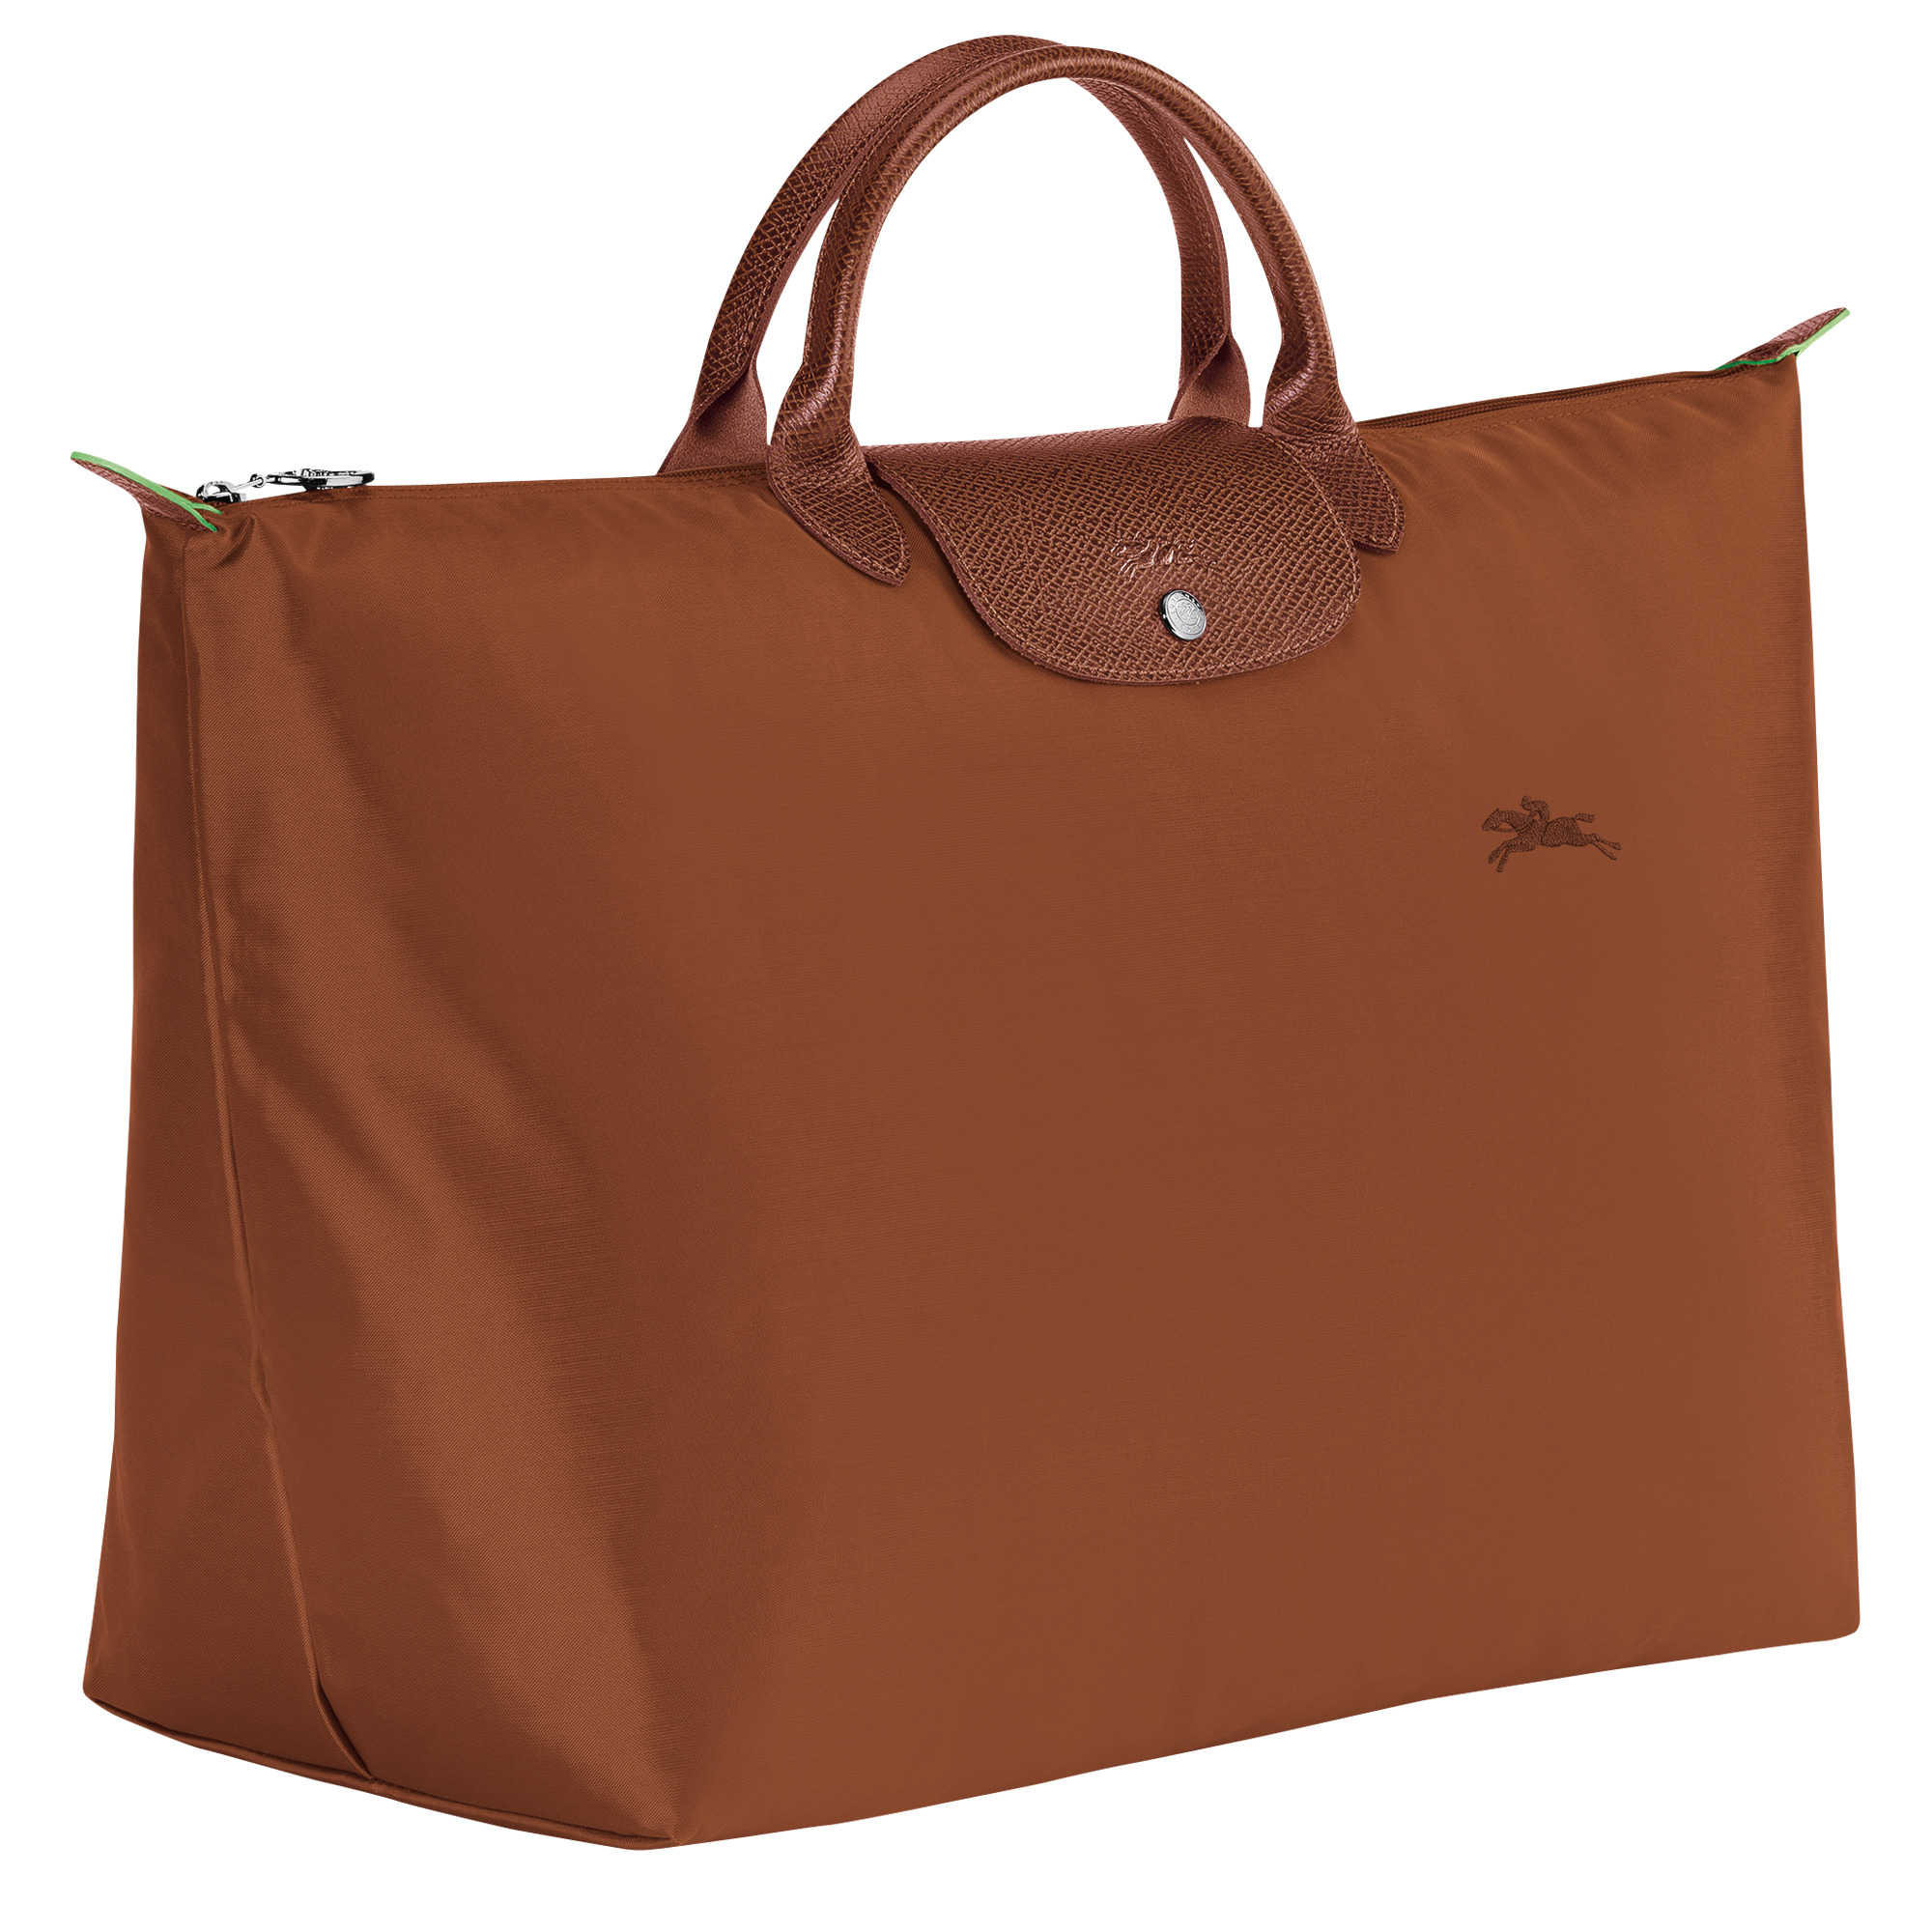 Le Pliage Green S Travel bag Cognac - Recycled canvas - 3